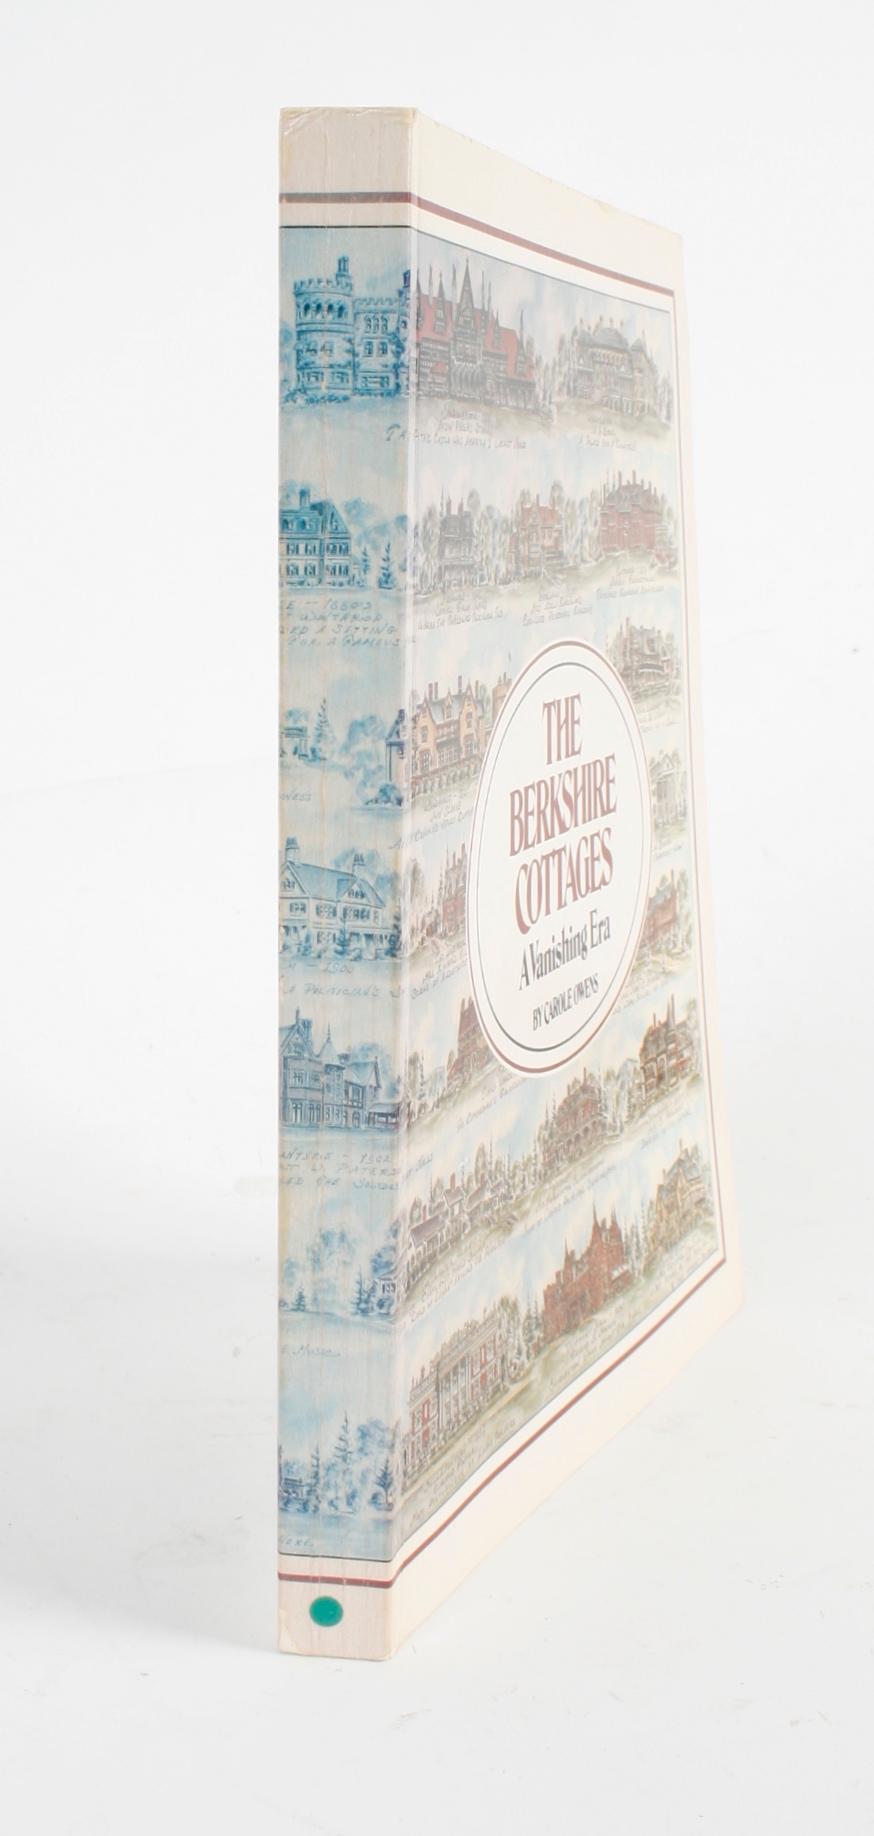 Berkshire Cottages, a Vanishing Era by Carole Owens, First Edition 8